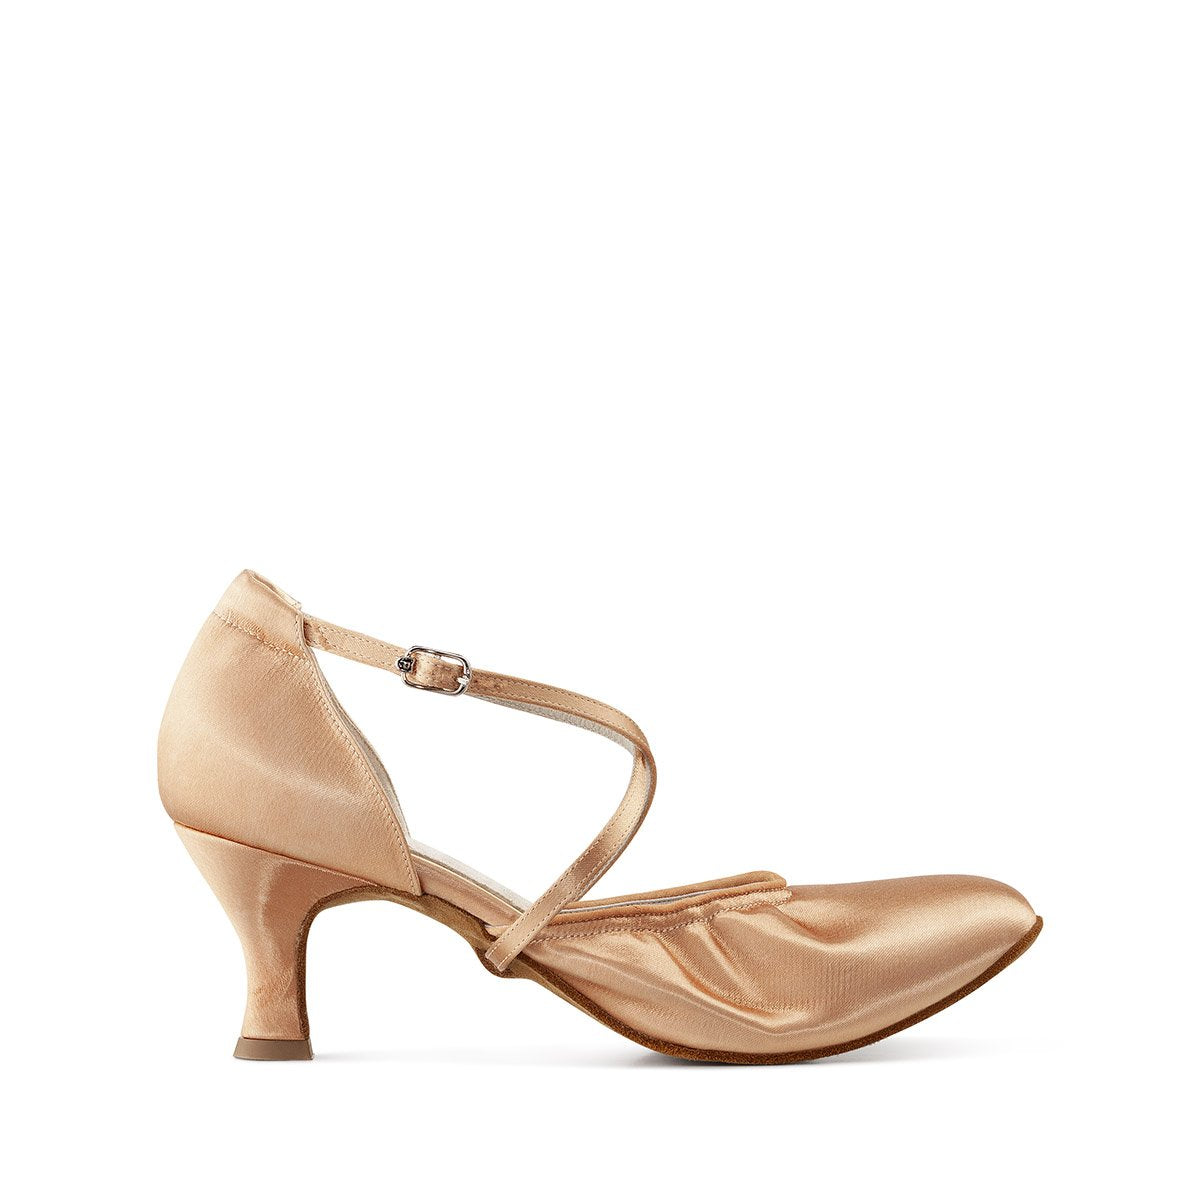 Paoul Streamline Flesh or Tan Satin Ladies Smooth Ballroom Dance Shoe with Elastic Band and Crossed Strap